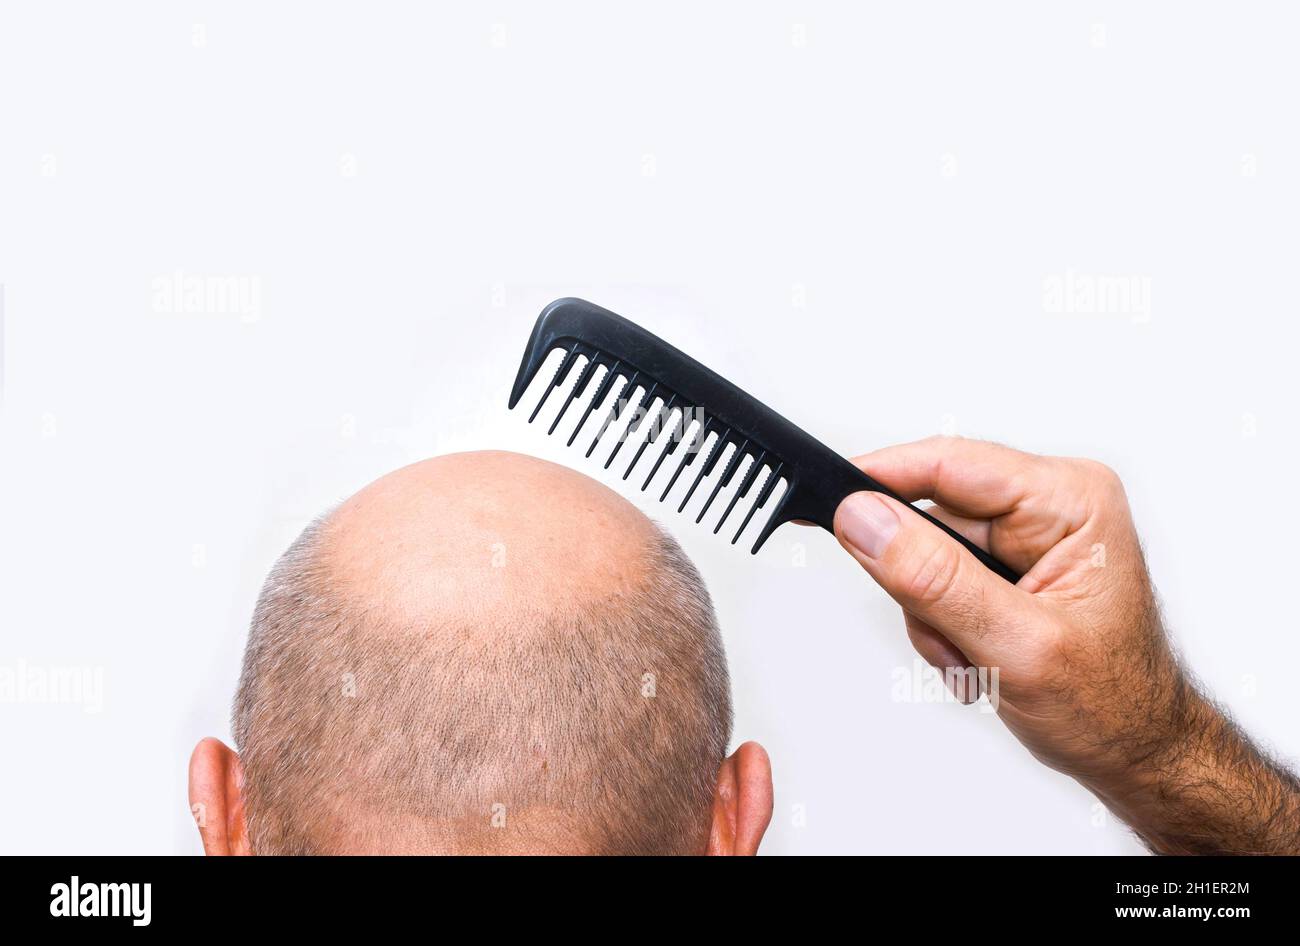 Human alopecia or hair loss - adult man hand holding comb on bald head Stock Photo